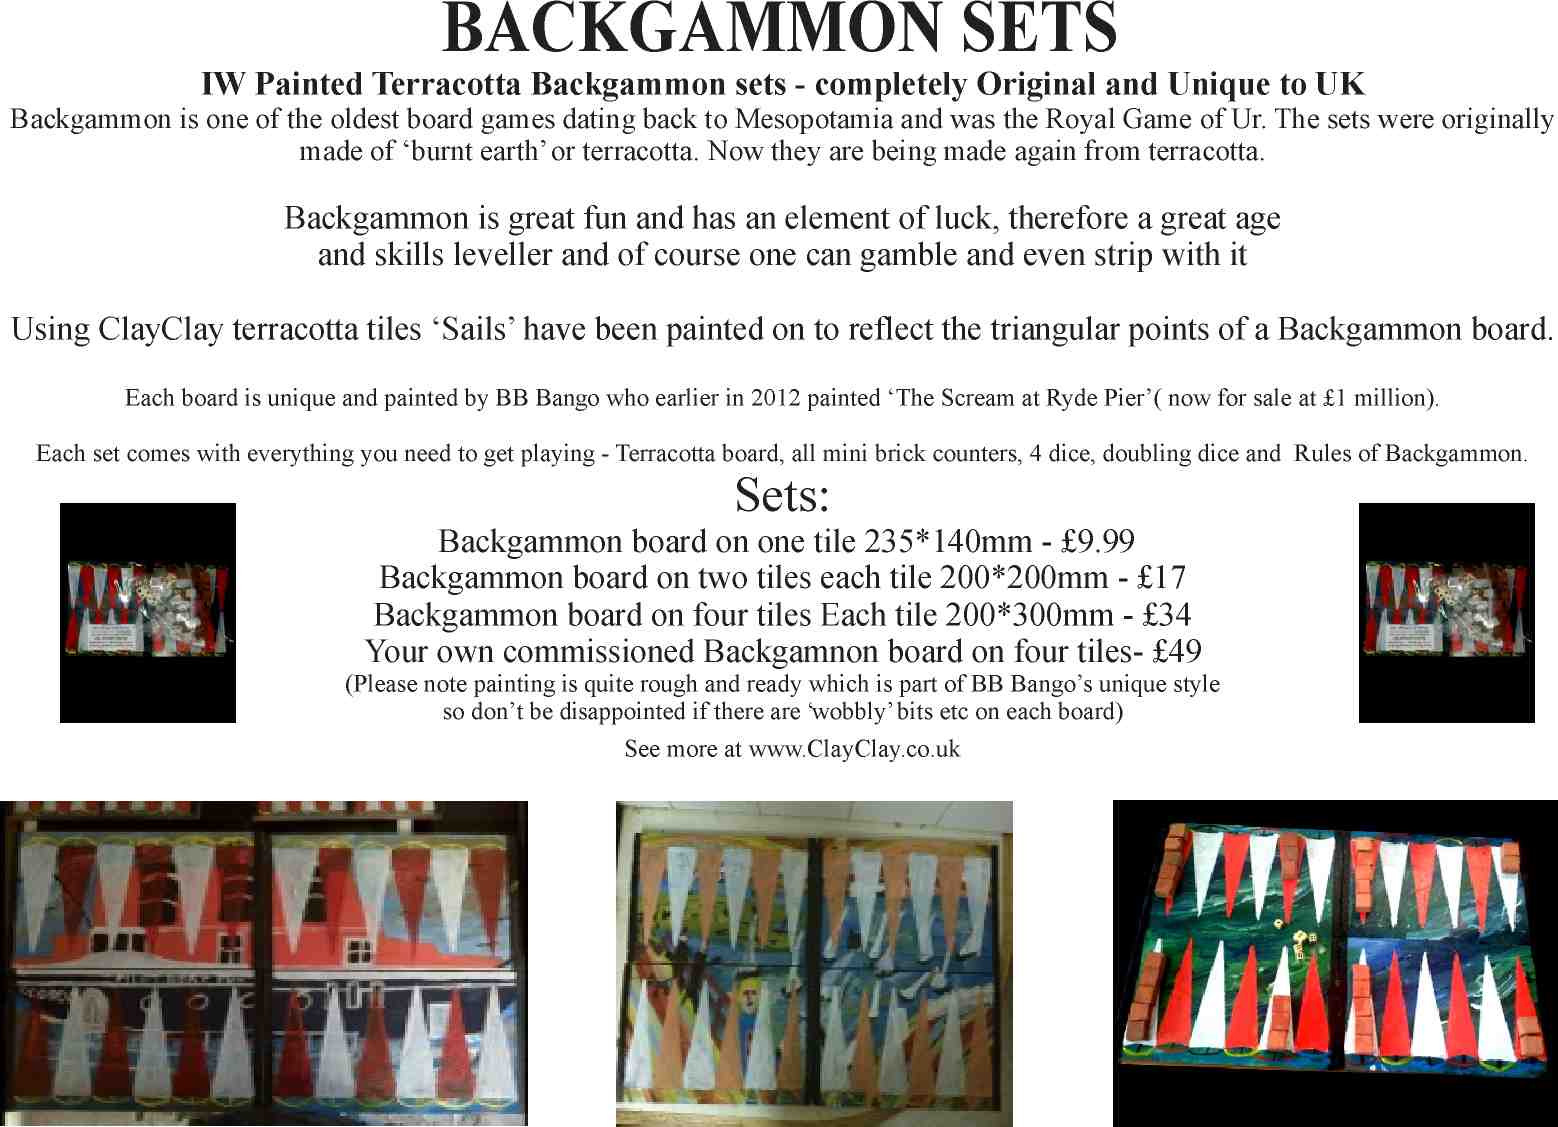 BB Bango Terracotta Backgammon sets Original painting on terracotta tiles. Sets include Terracotta counters, dice and doubling dice with full Backgammon Rules  Available in different sizes from £9.99. On display in Bembridge.